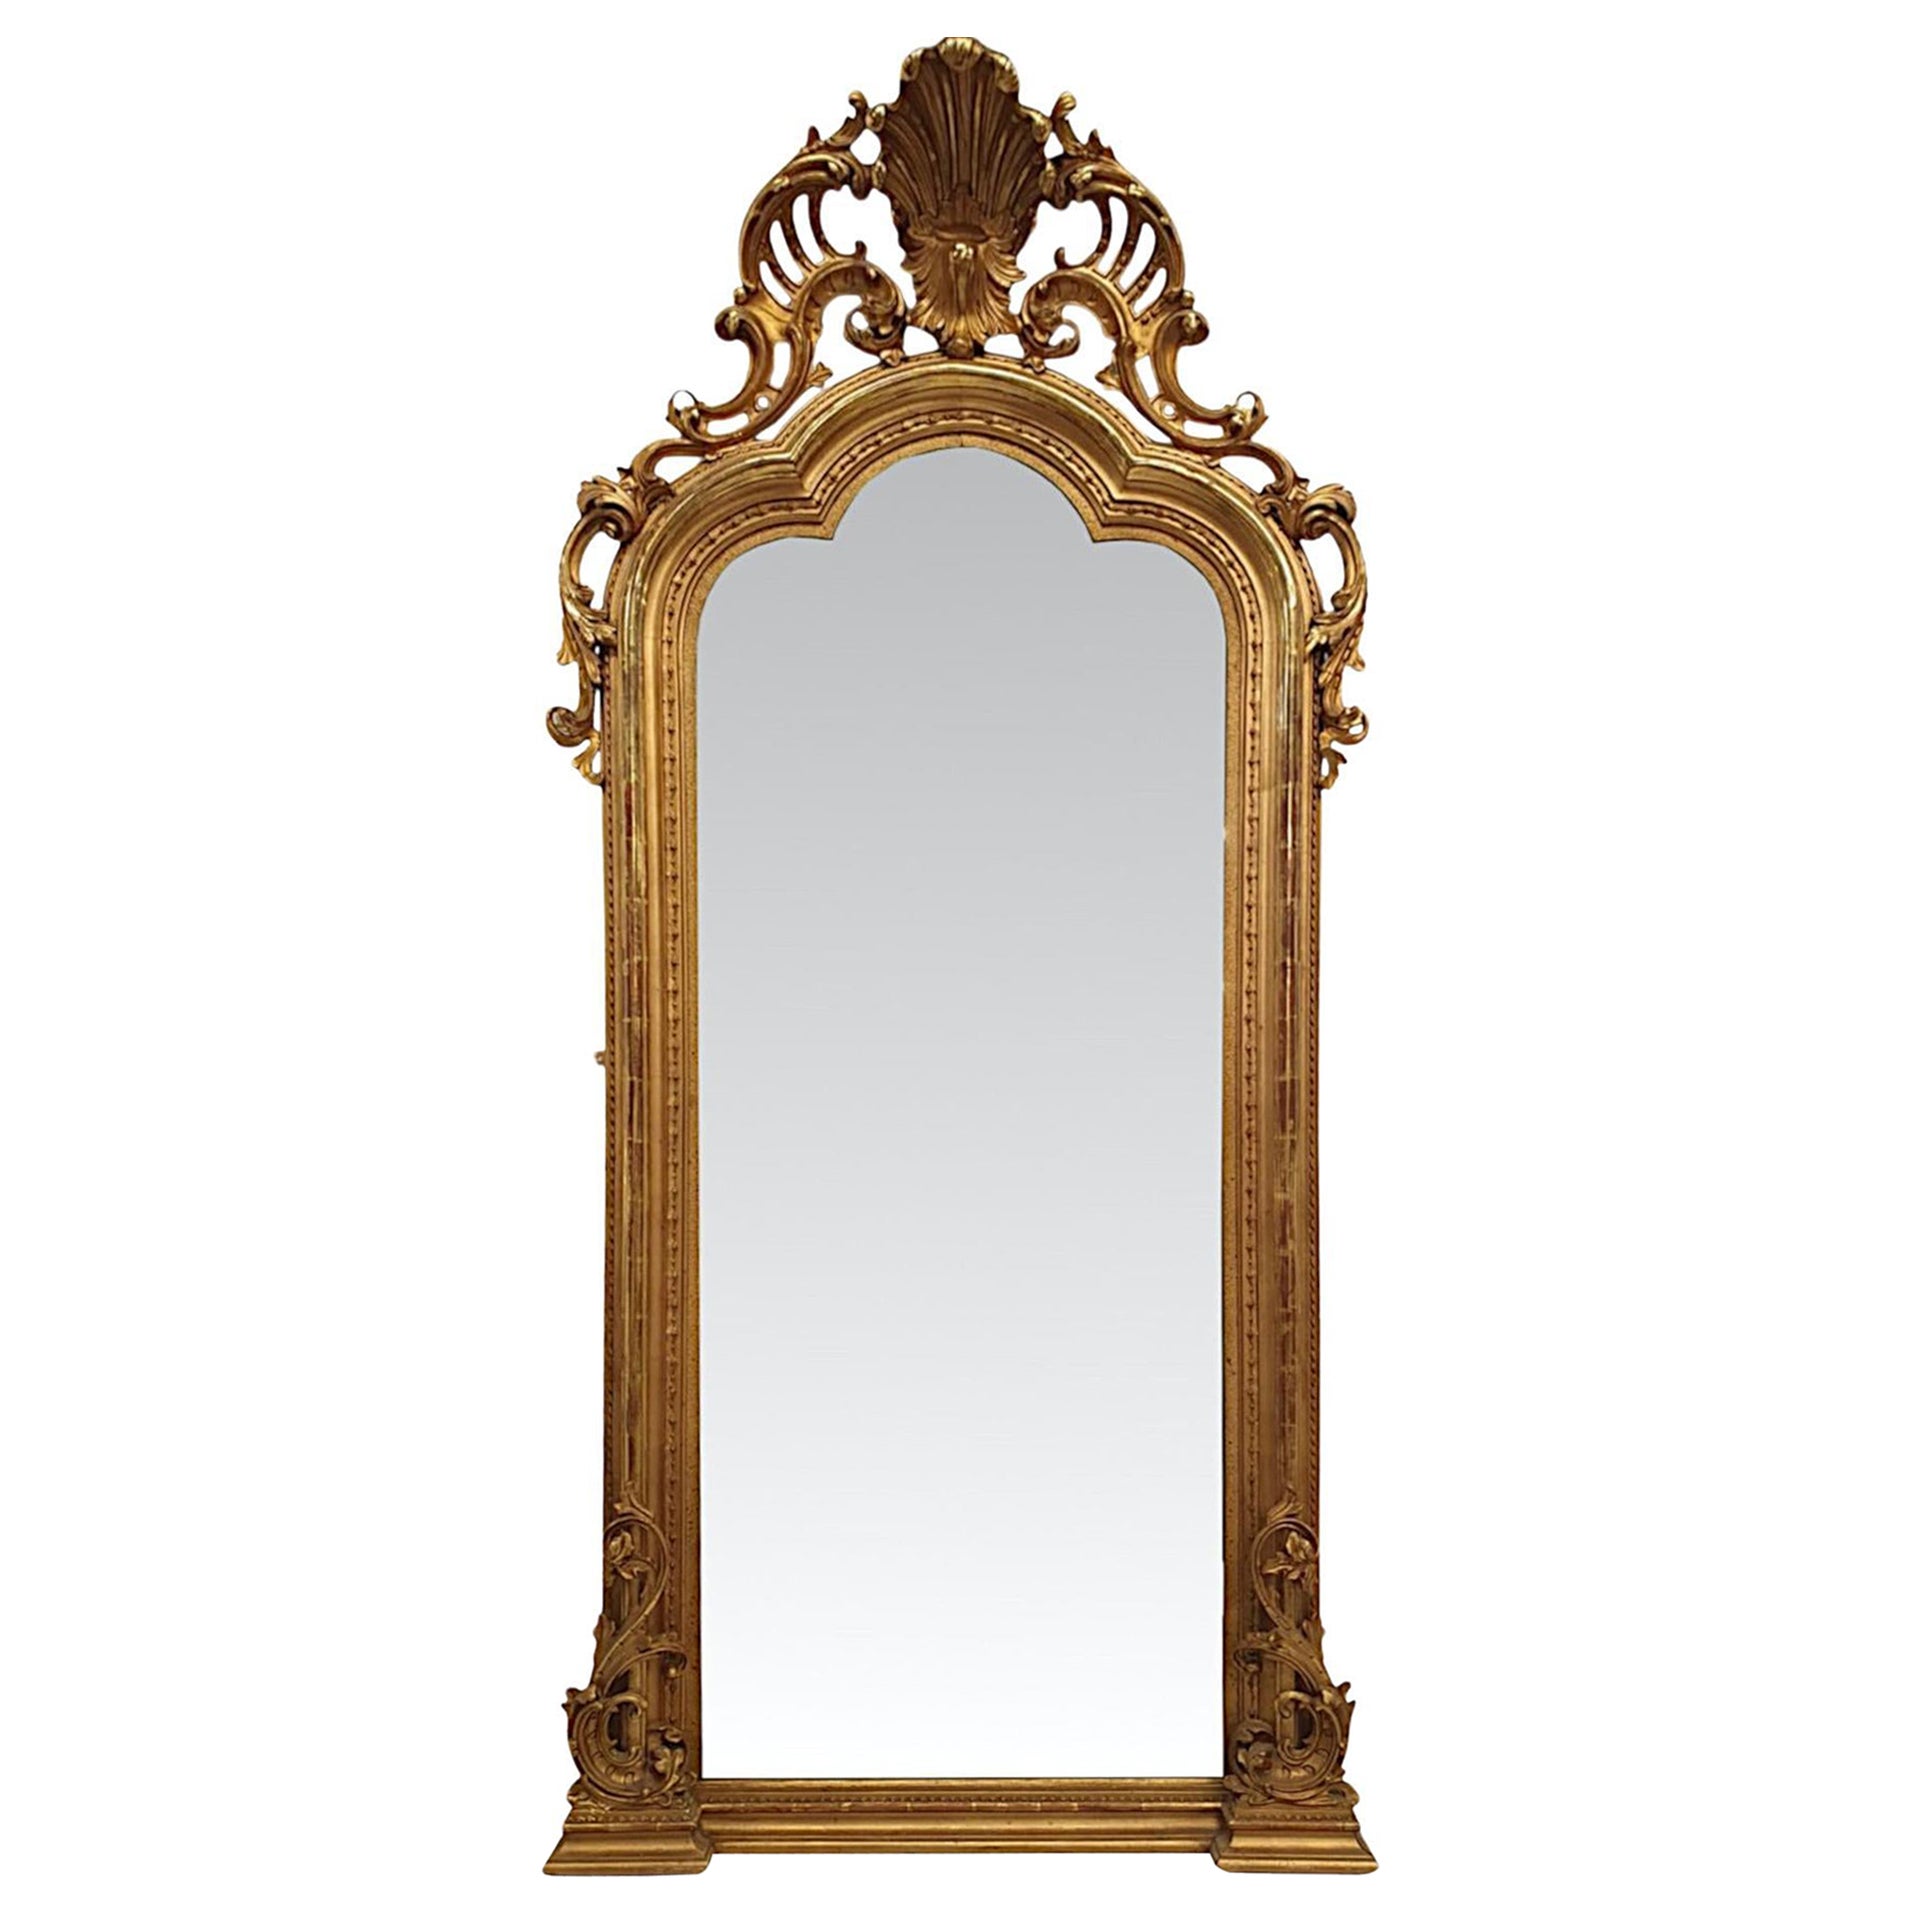  A Fabulous Large 19th Century Giltwood Hall or Pier or Dressing Mirror For Sale